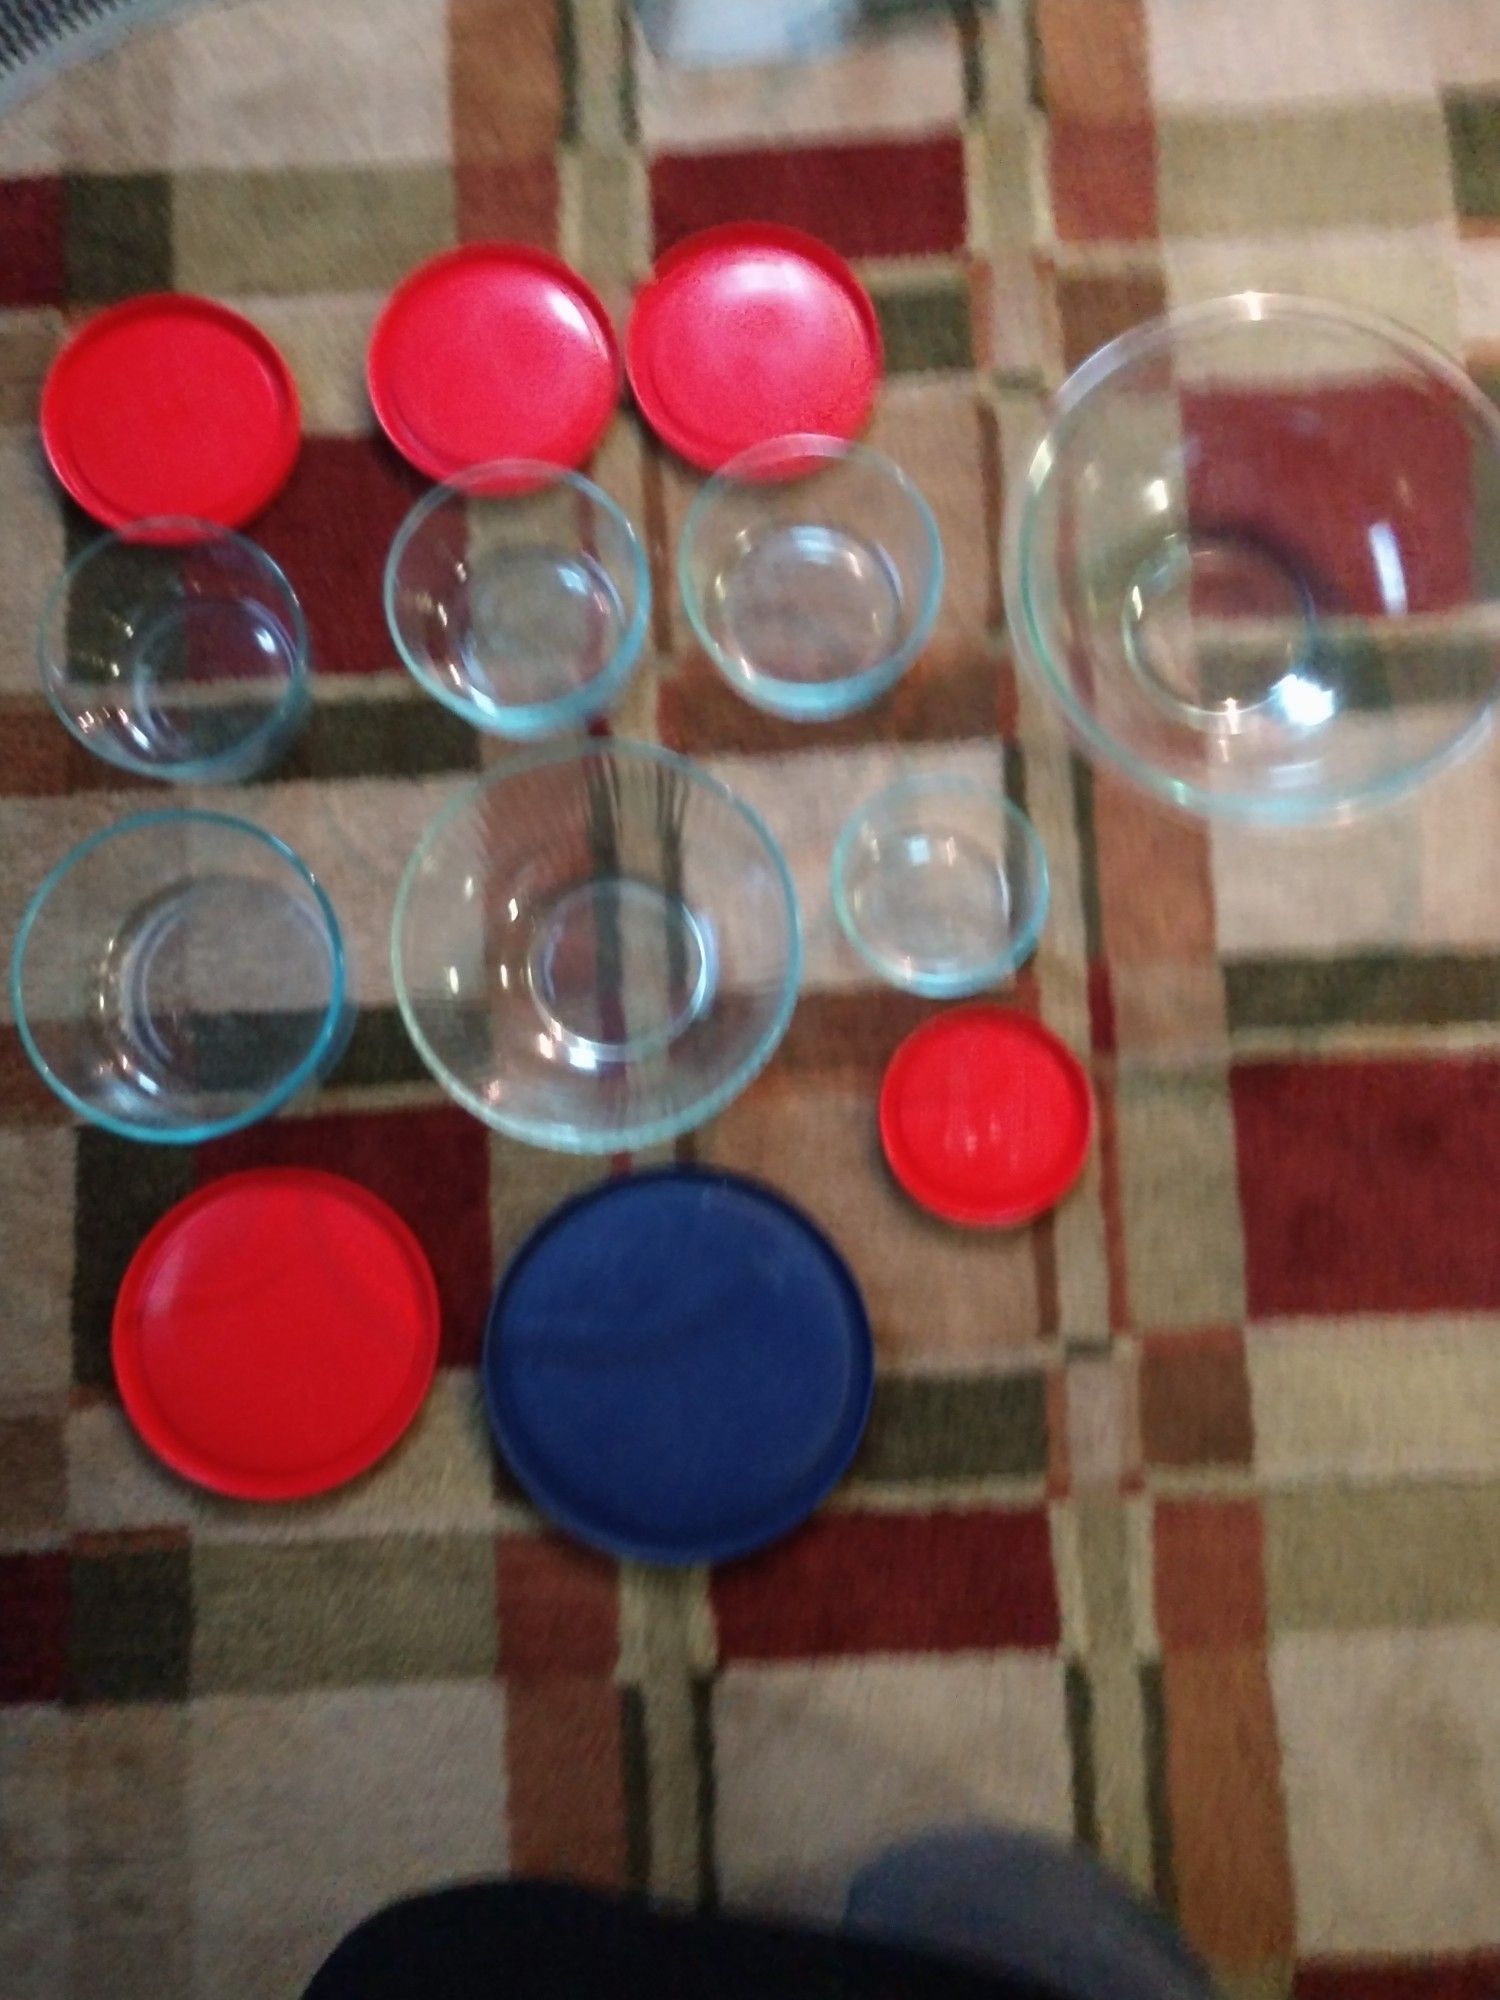 Pyrex glass storage and mixing bowls